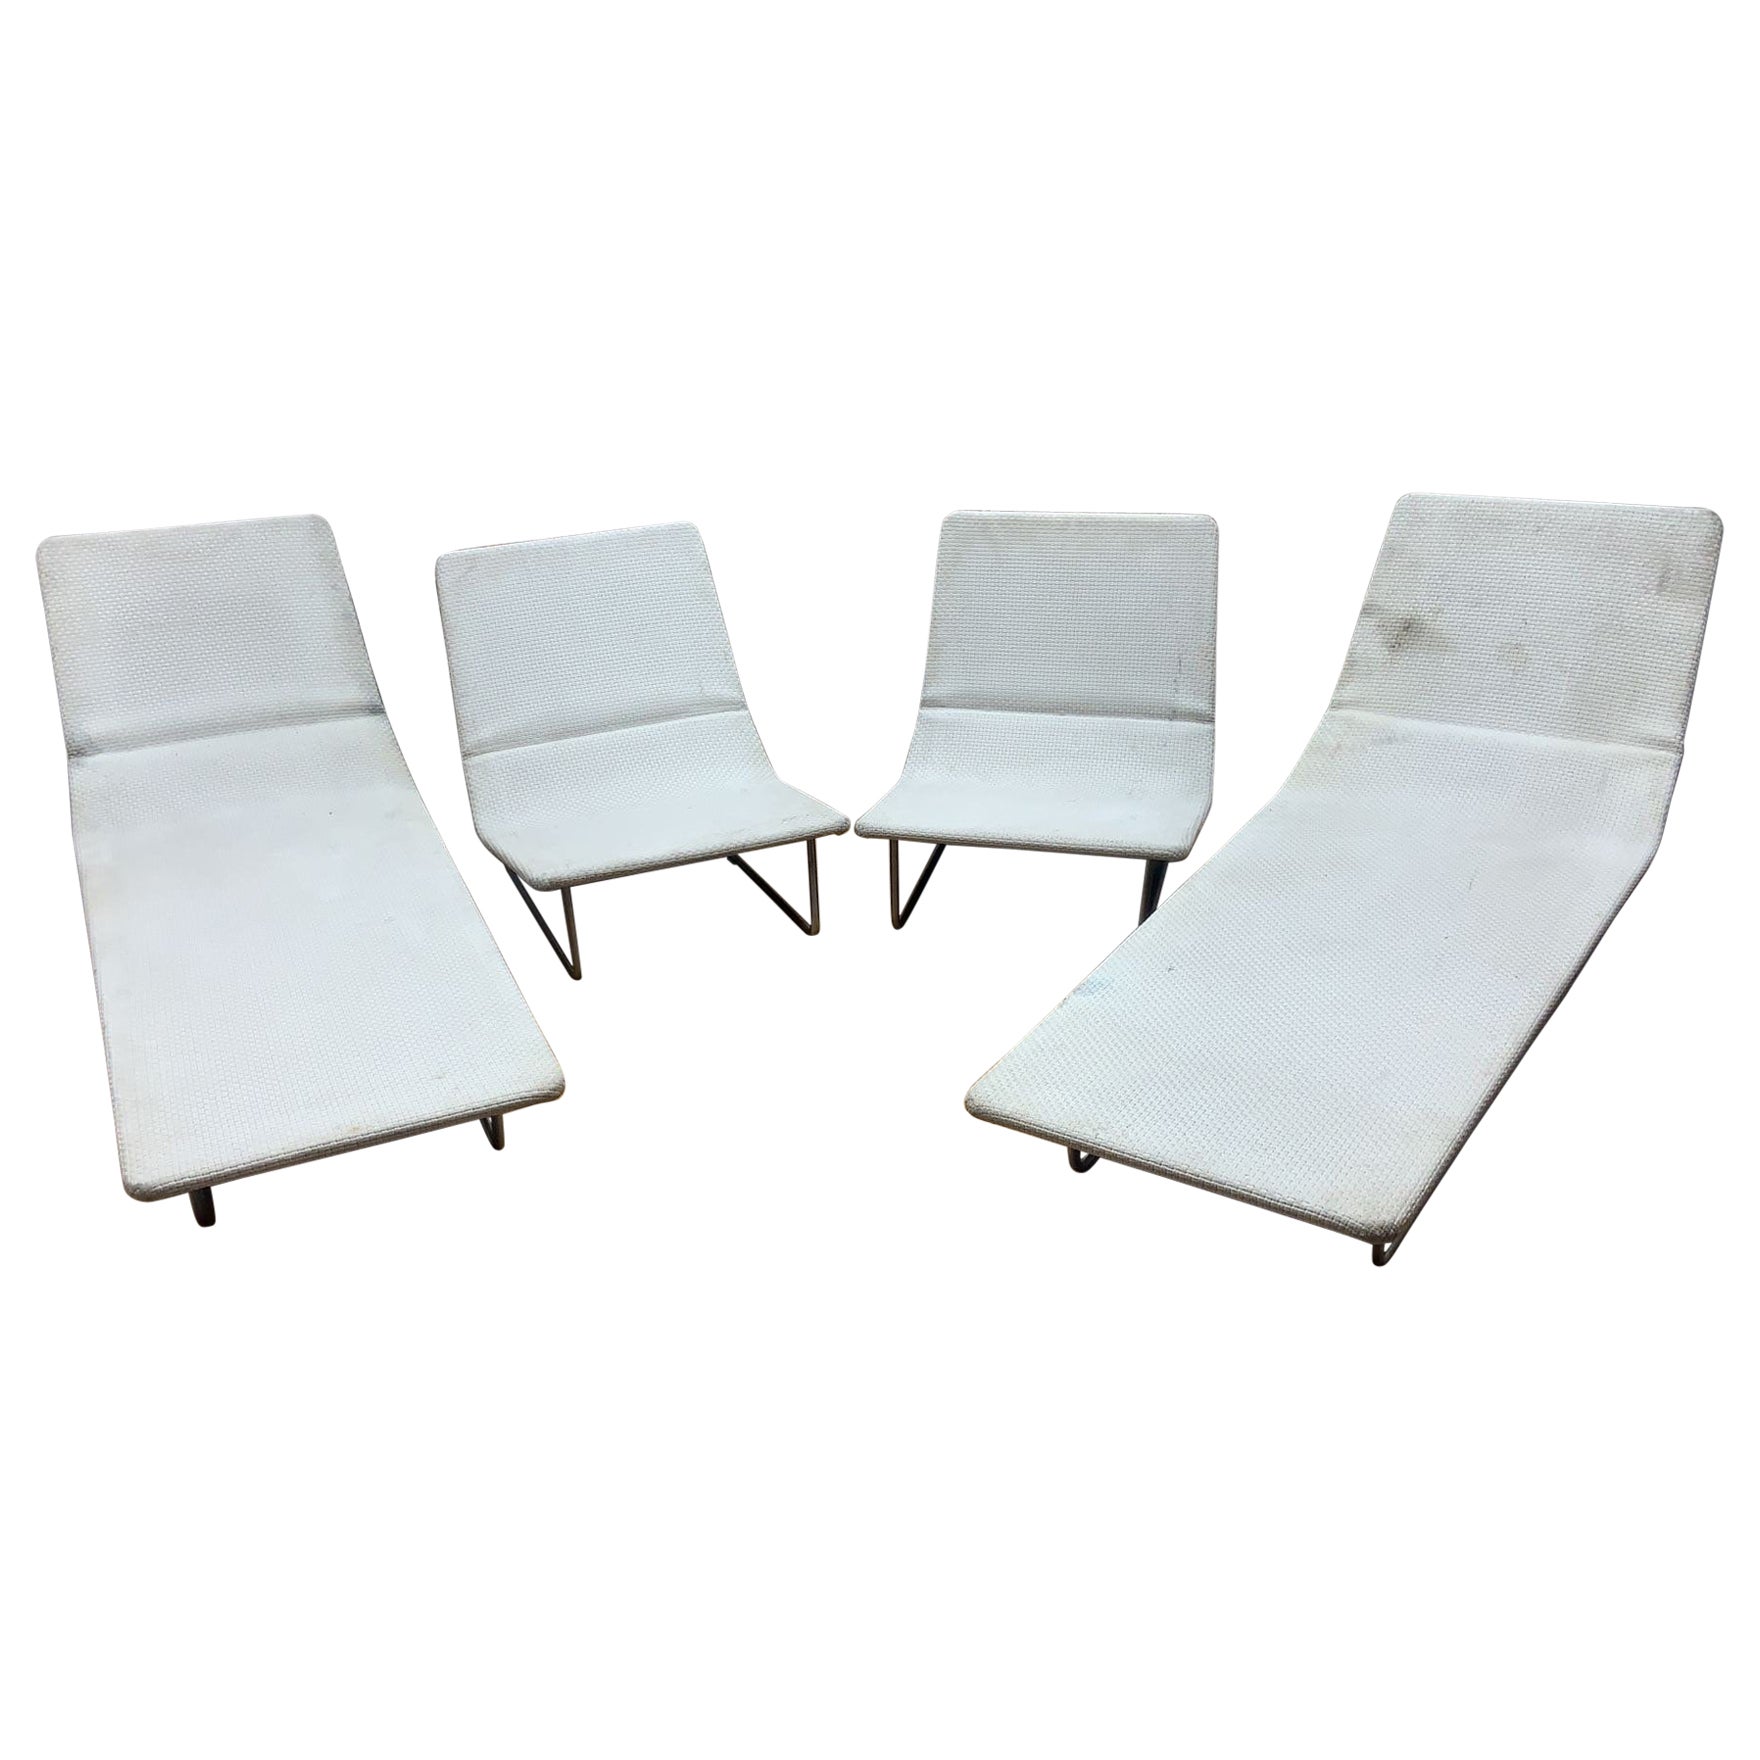  2 Sand and 2 Surf Sun Loungers by Francesco Rota for Paola Lenti, Set of 4